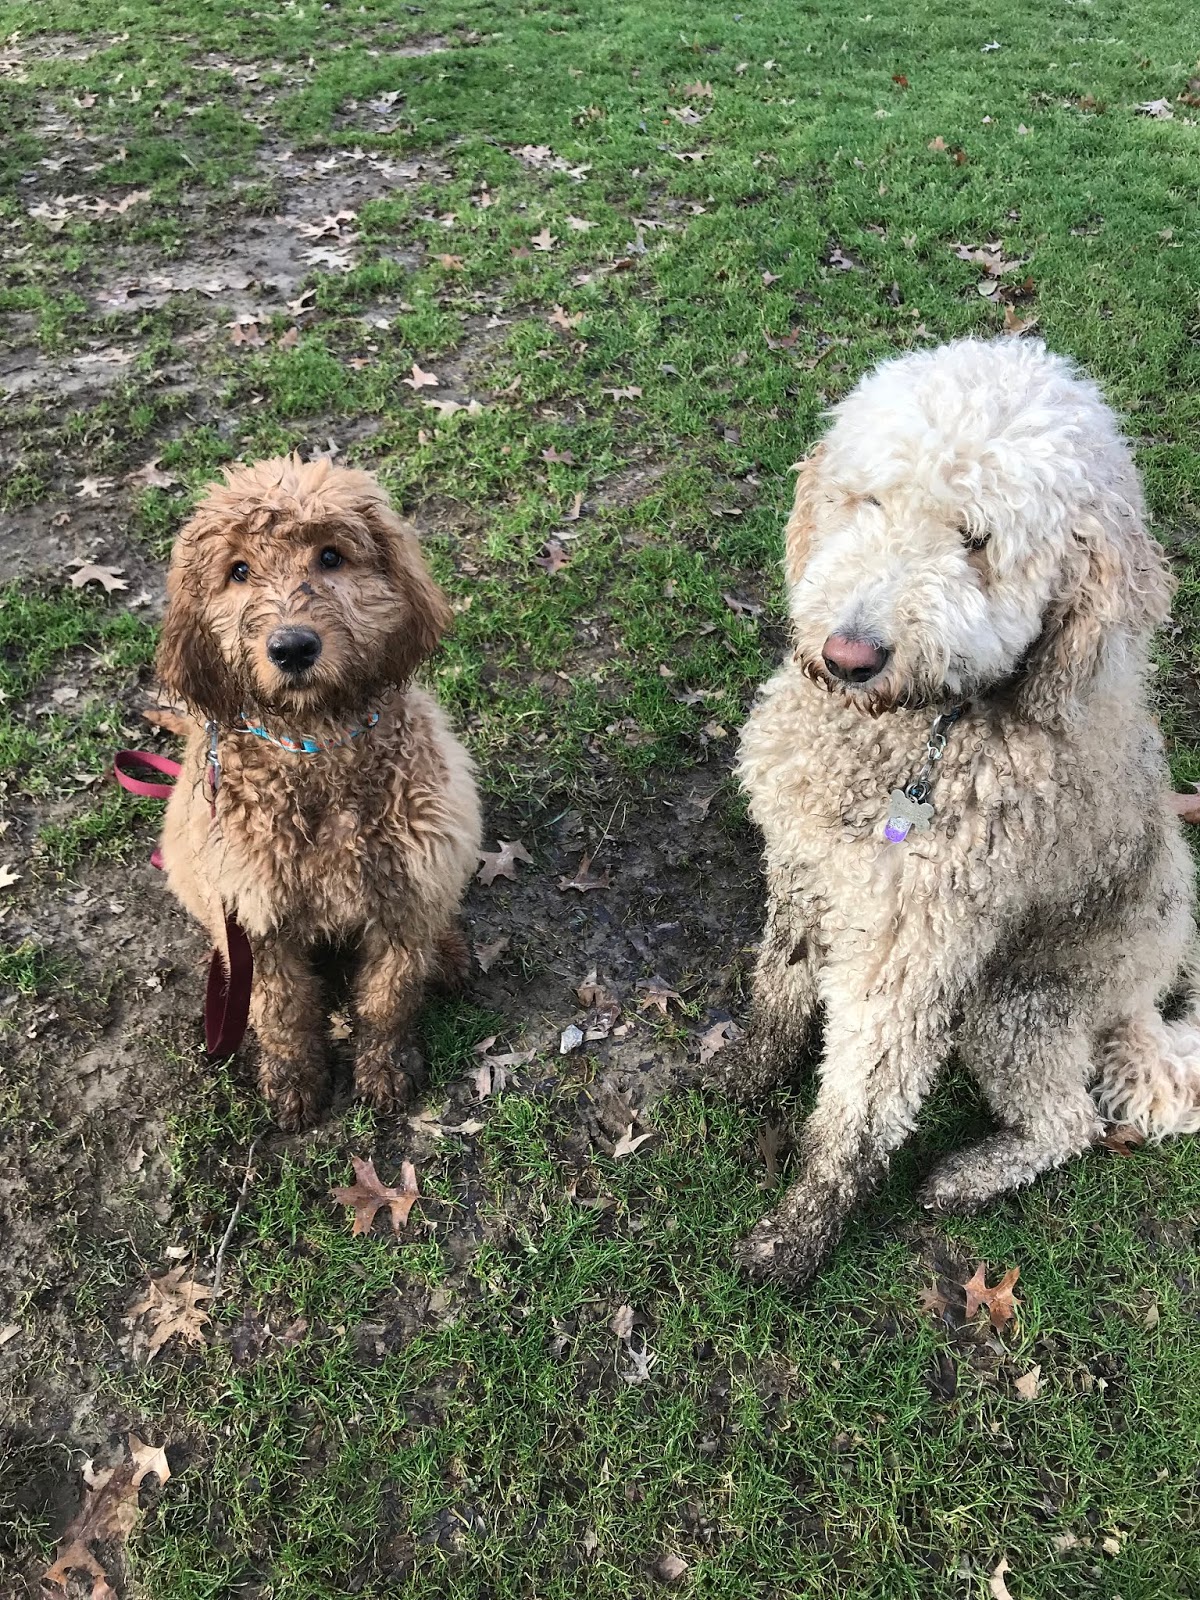 The dirty doodle